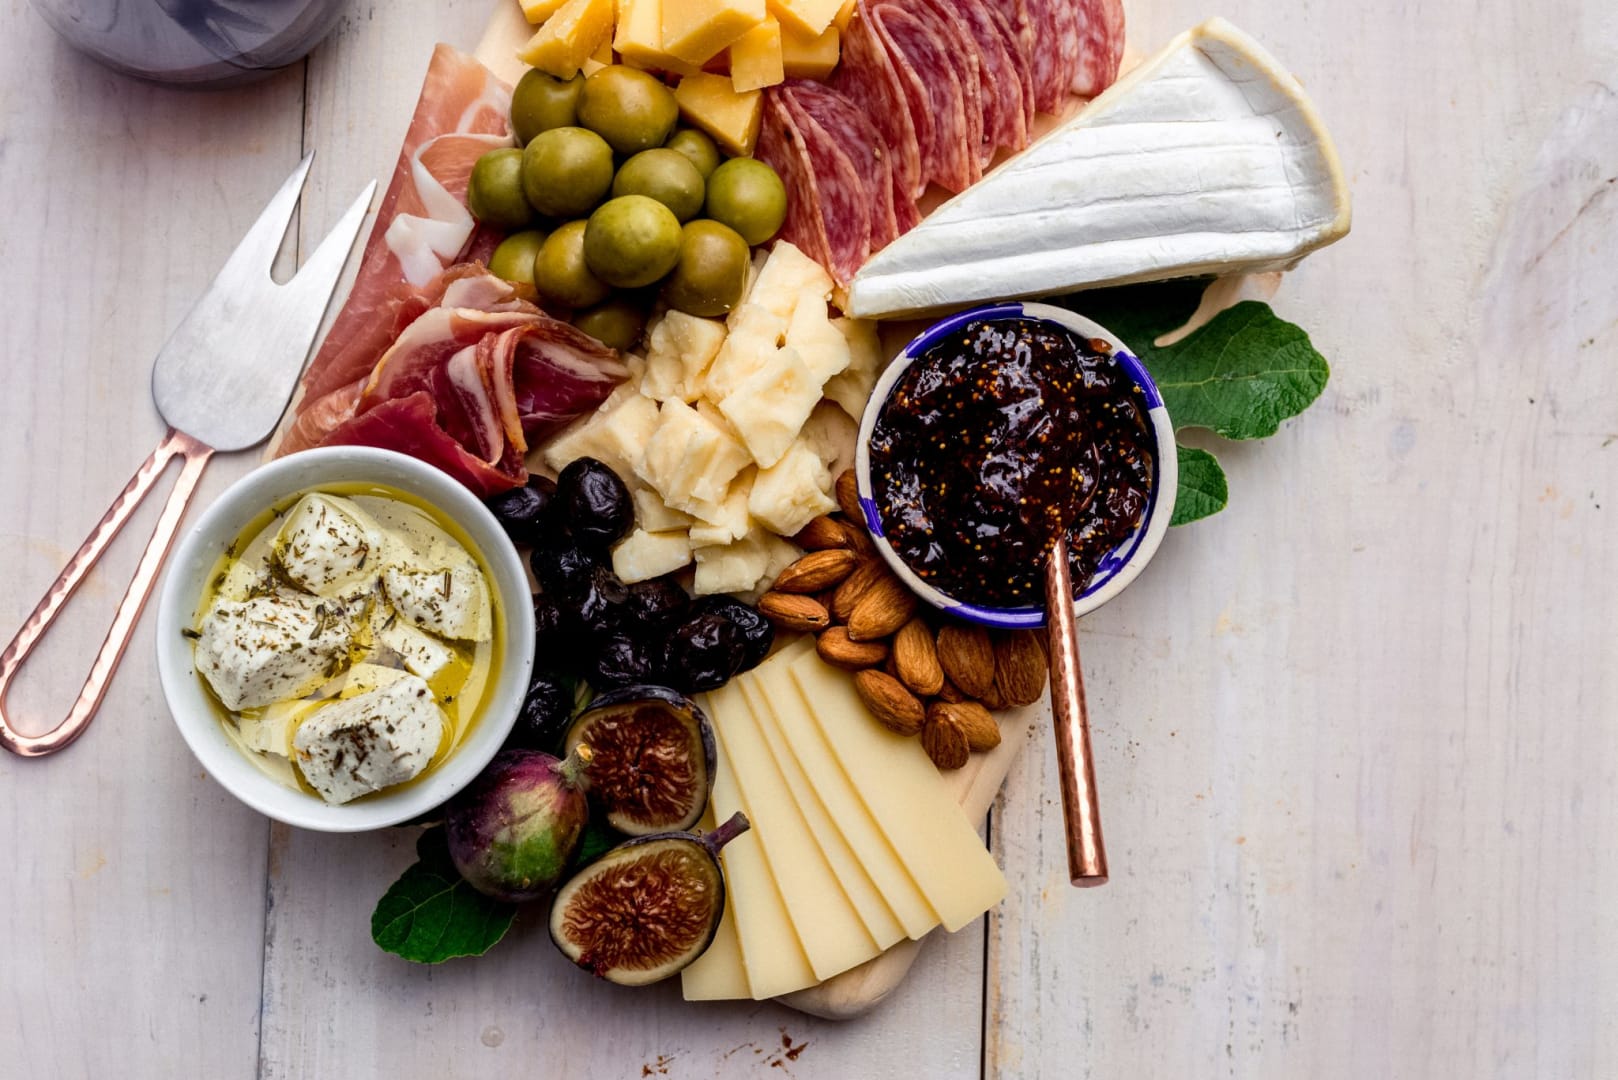 Simple Charcuterie Board: 5 Ingredients Only